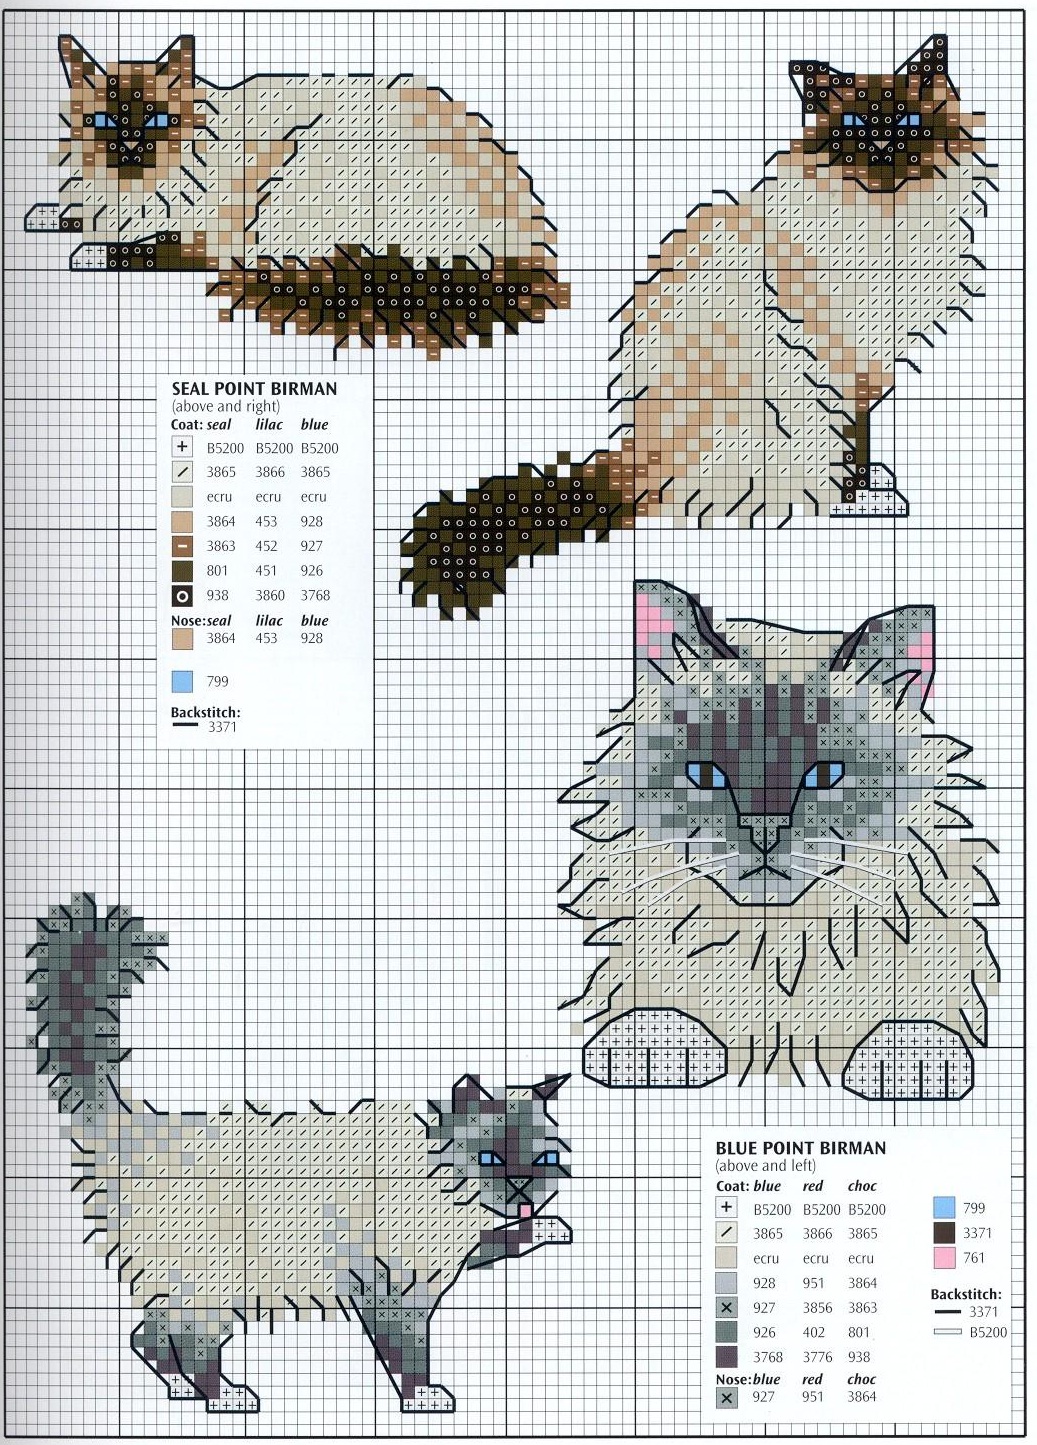 needle-works-butterfly-cats-and-kittens-cross-stitch-patterns